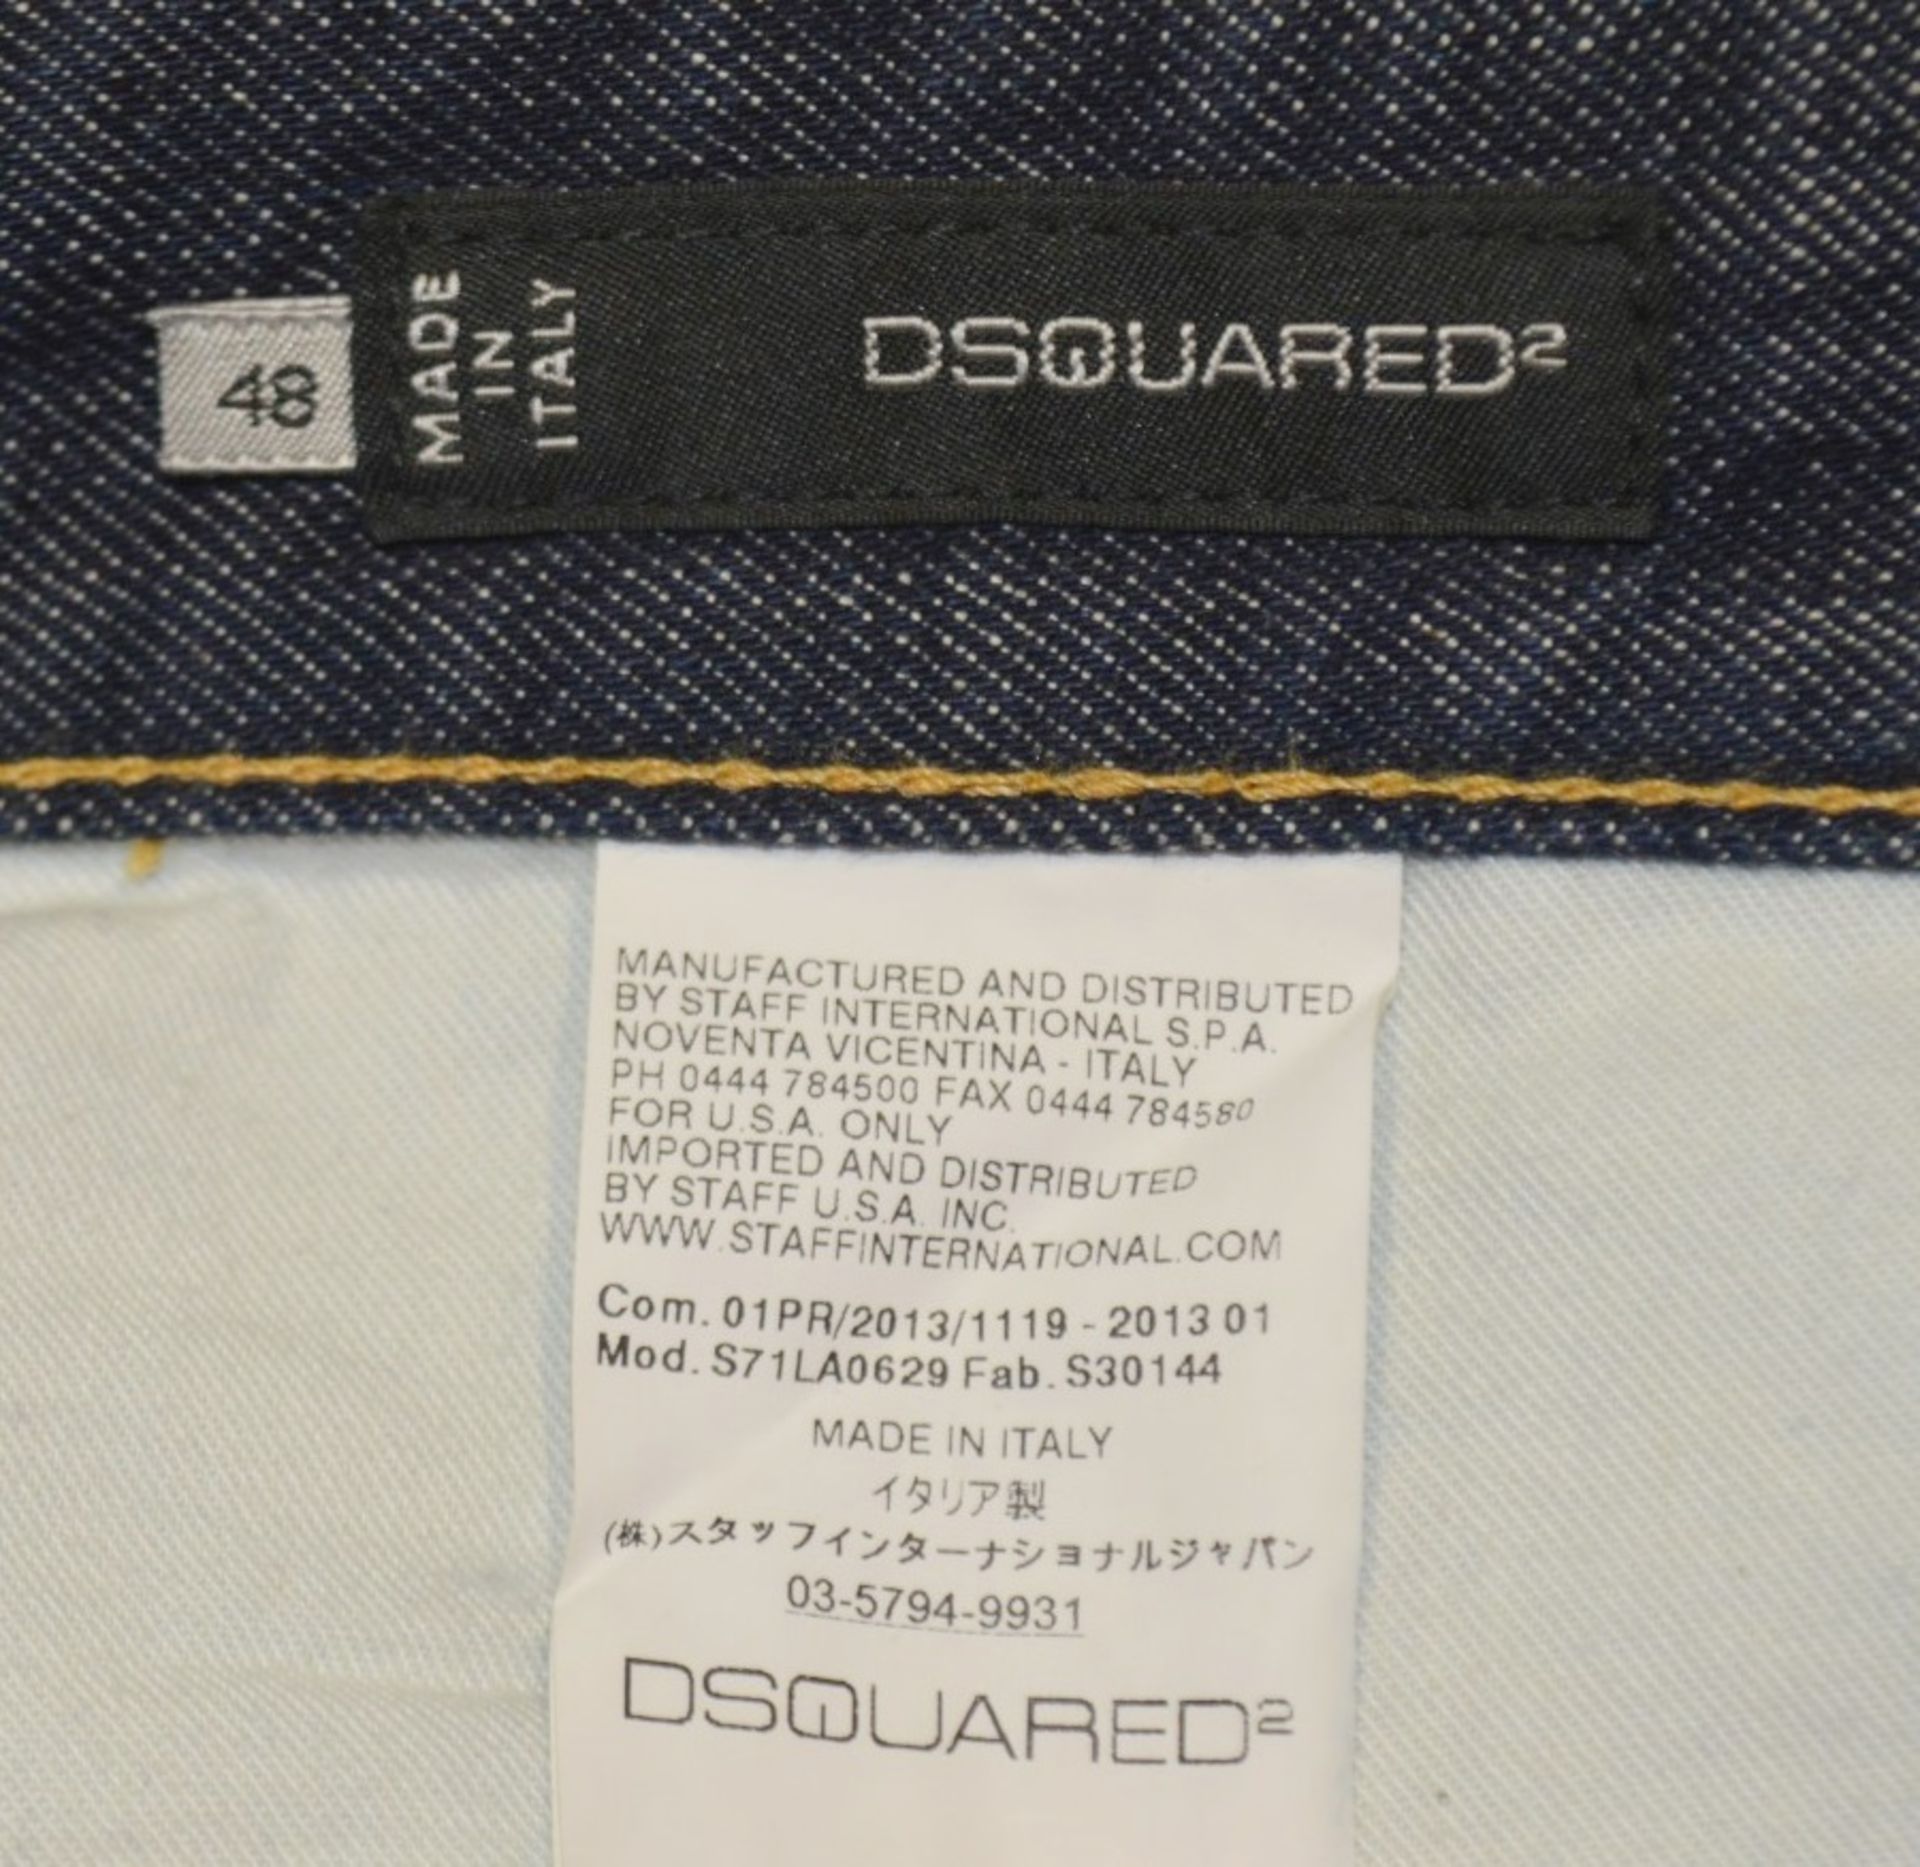 1 x Pair Of Men's Genuine Dsquared2 Jeans In Dark Blue - Size: 48 - Preowned In Very Good - Image 5 of 9